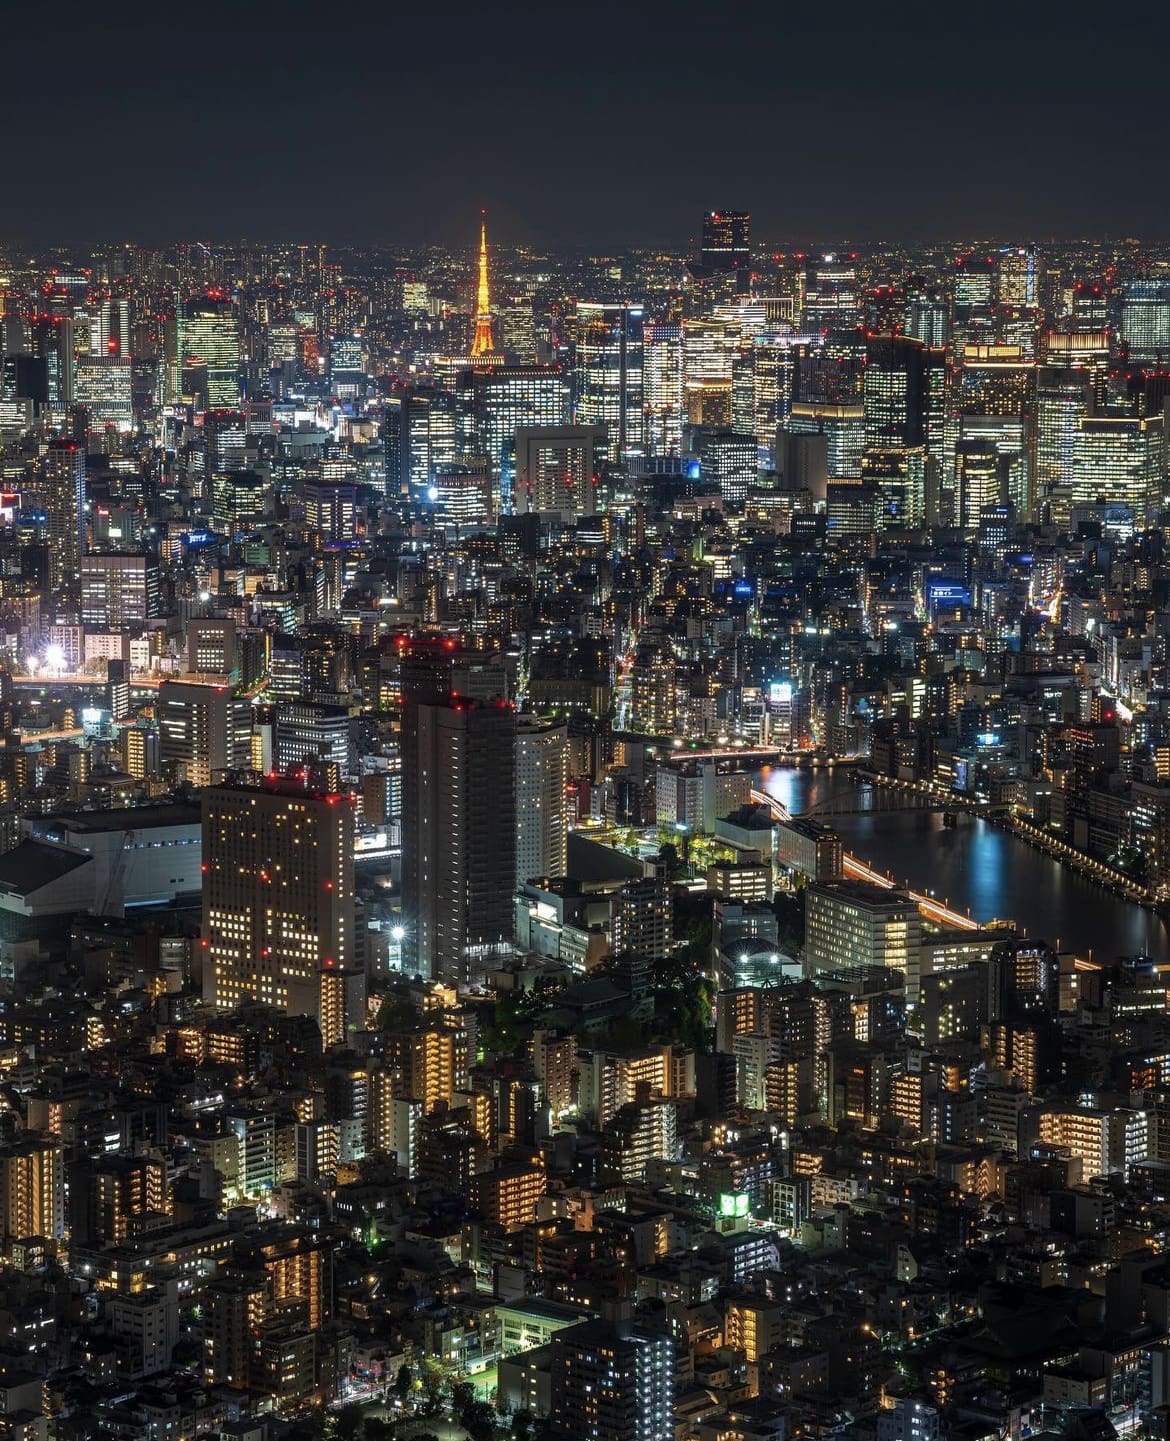 The city of Tokyo